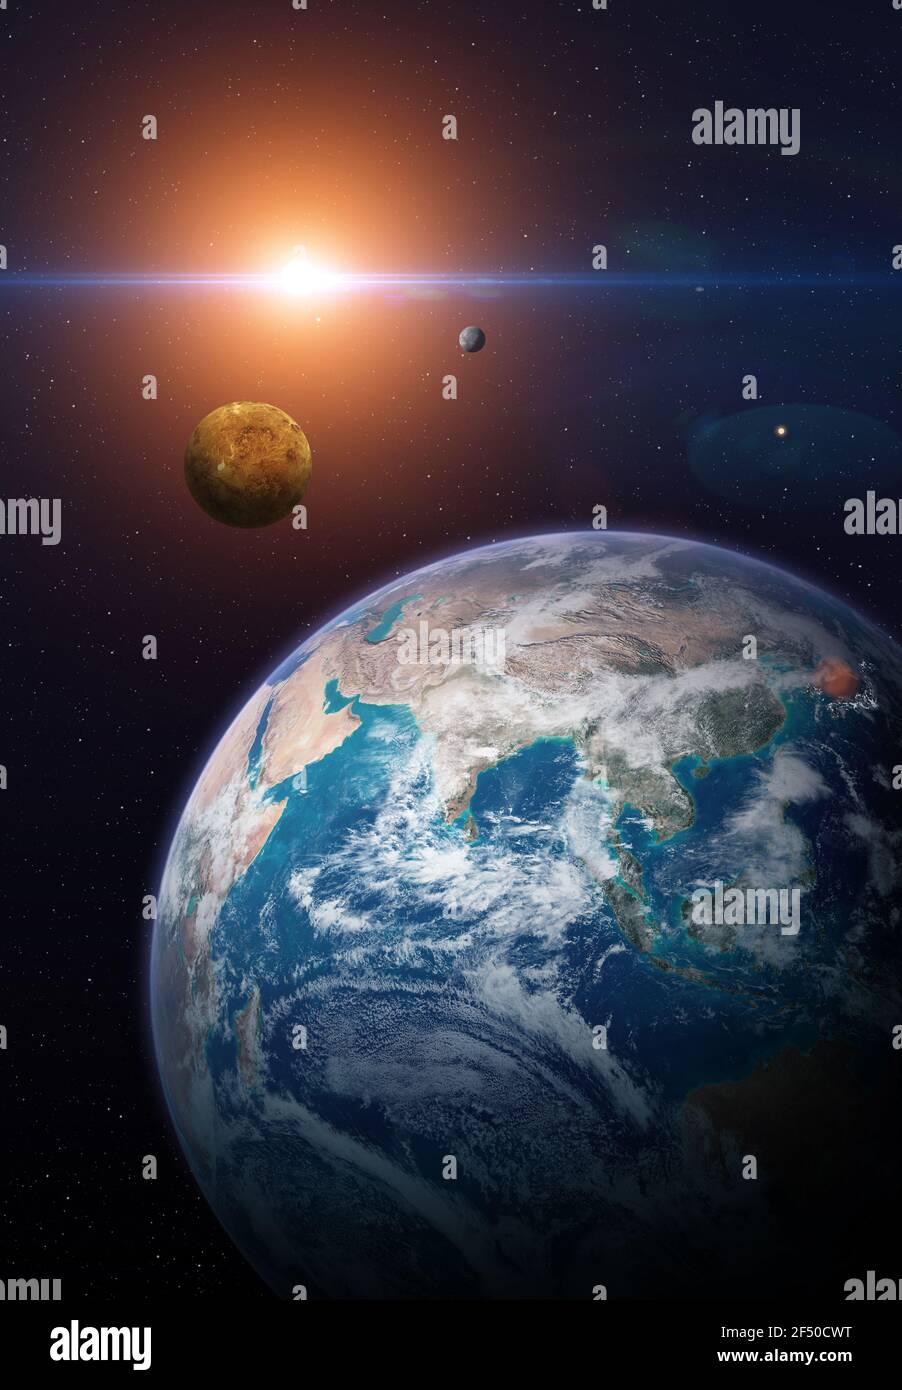 View of the planet Earth from space. Solar system planets: Earth, Venus, Mercury. Terrestrial planets.Elements of this image are furnished by NASA. Stock Photo